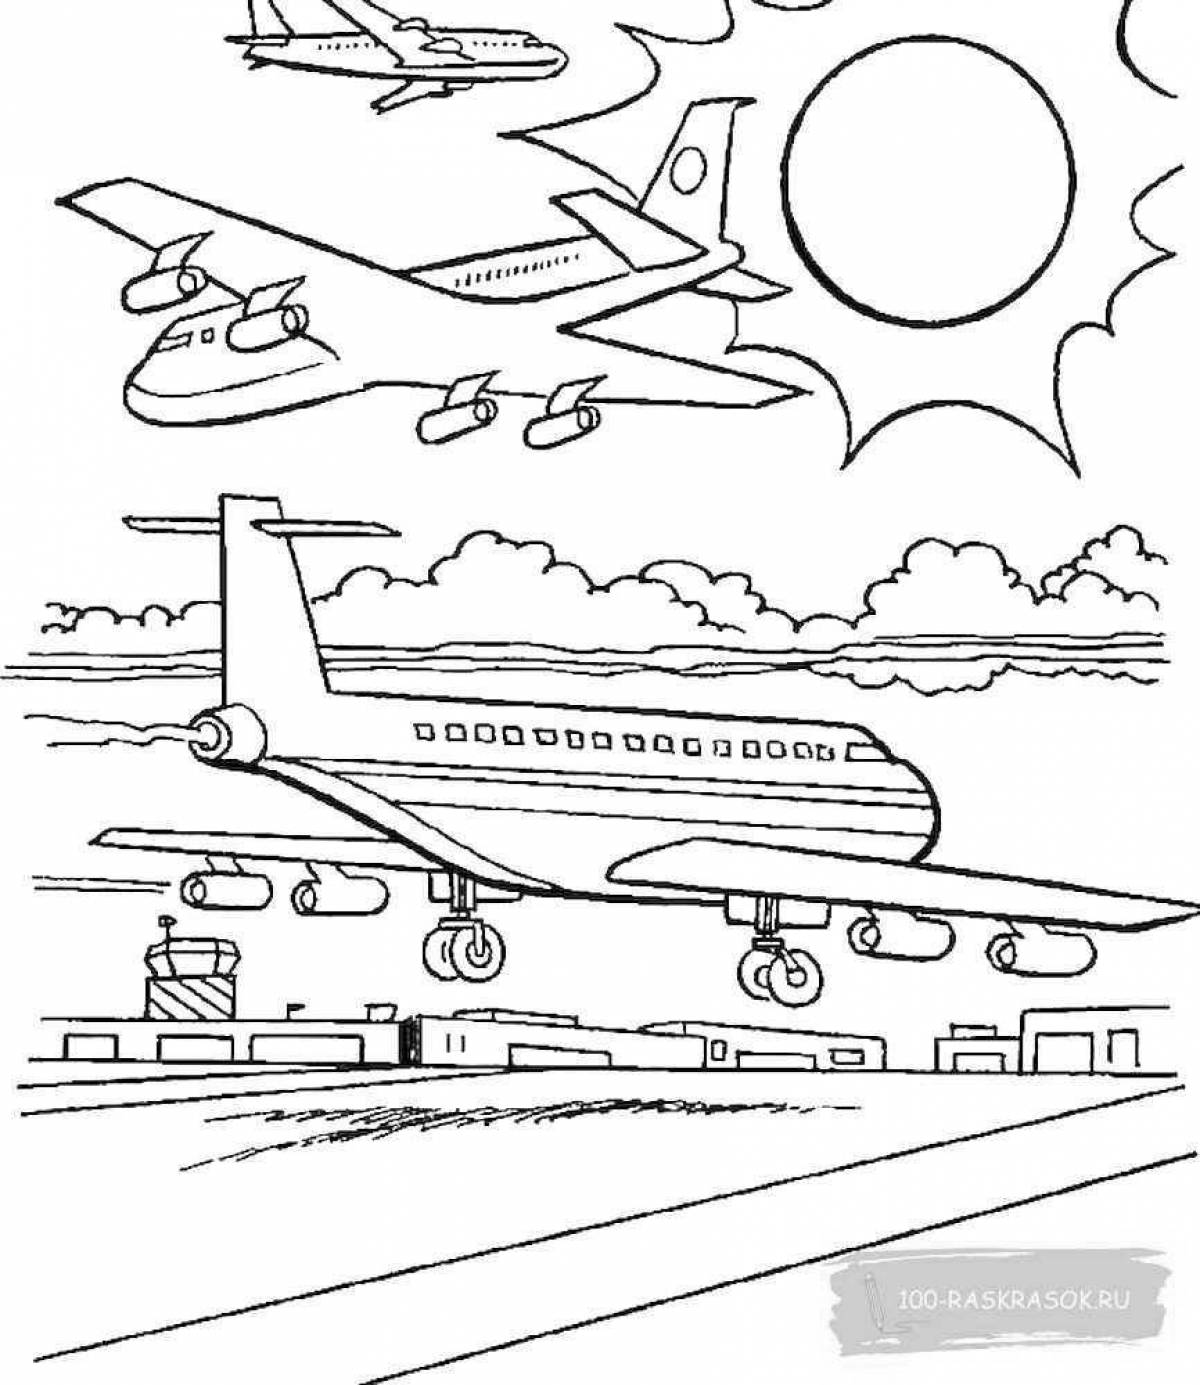 Adorable air transport coloring book for 6-7 year olds